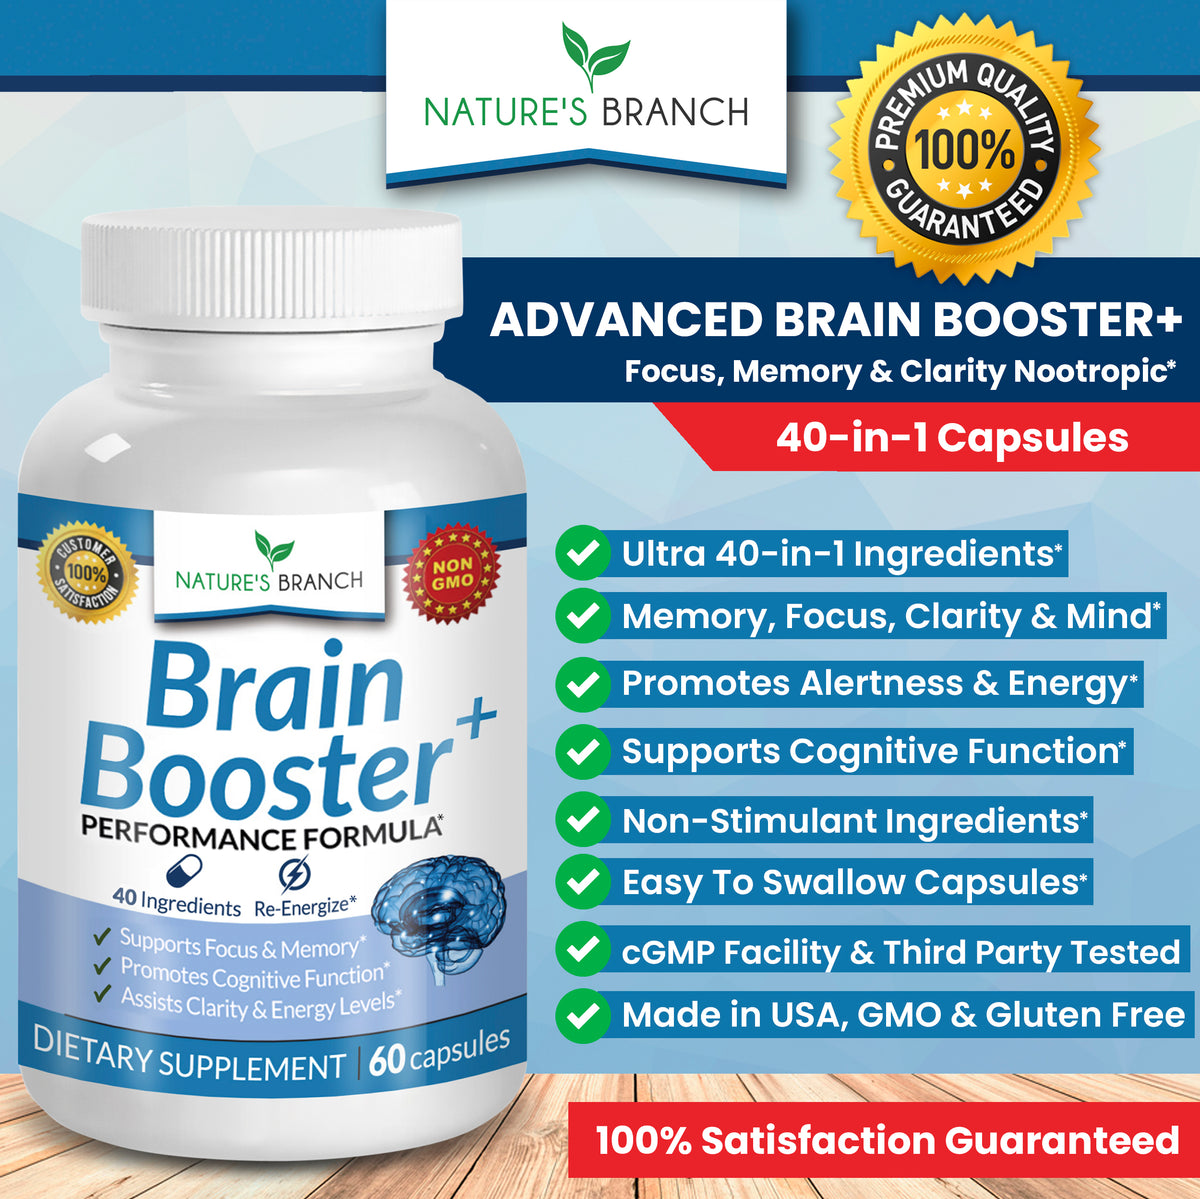 Nature&#39;s Branch Brain Booster bottle and bullet points showing the benefits